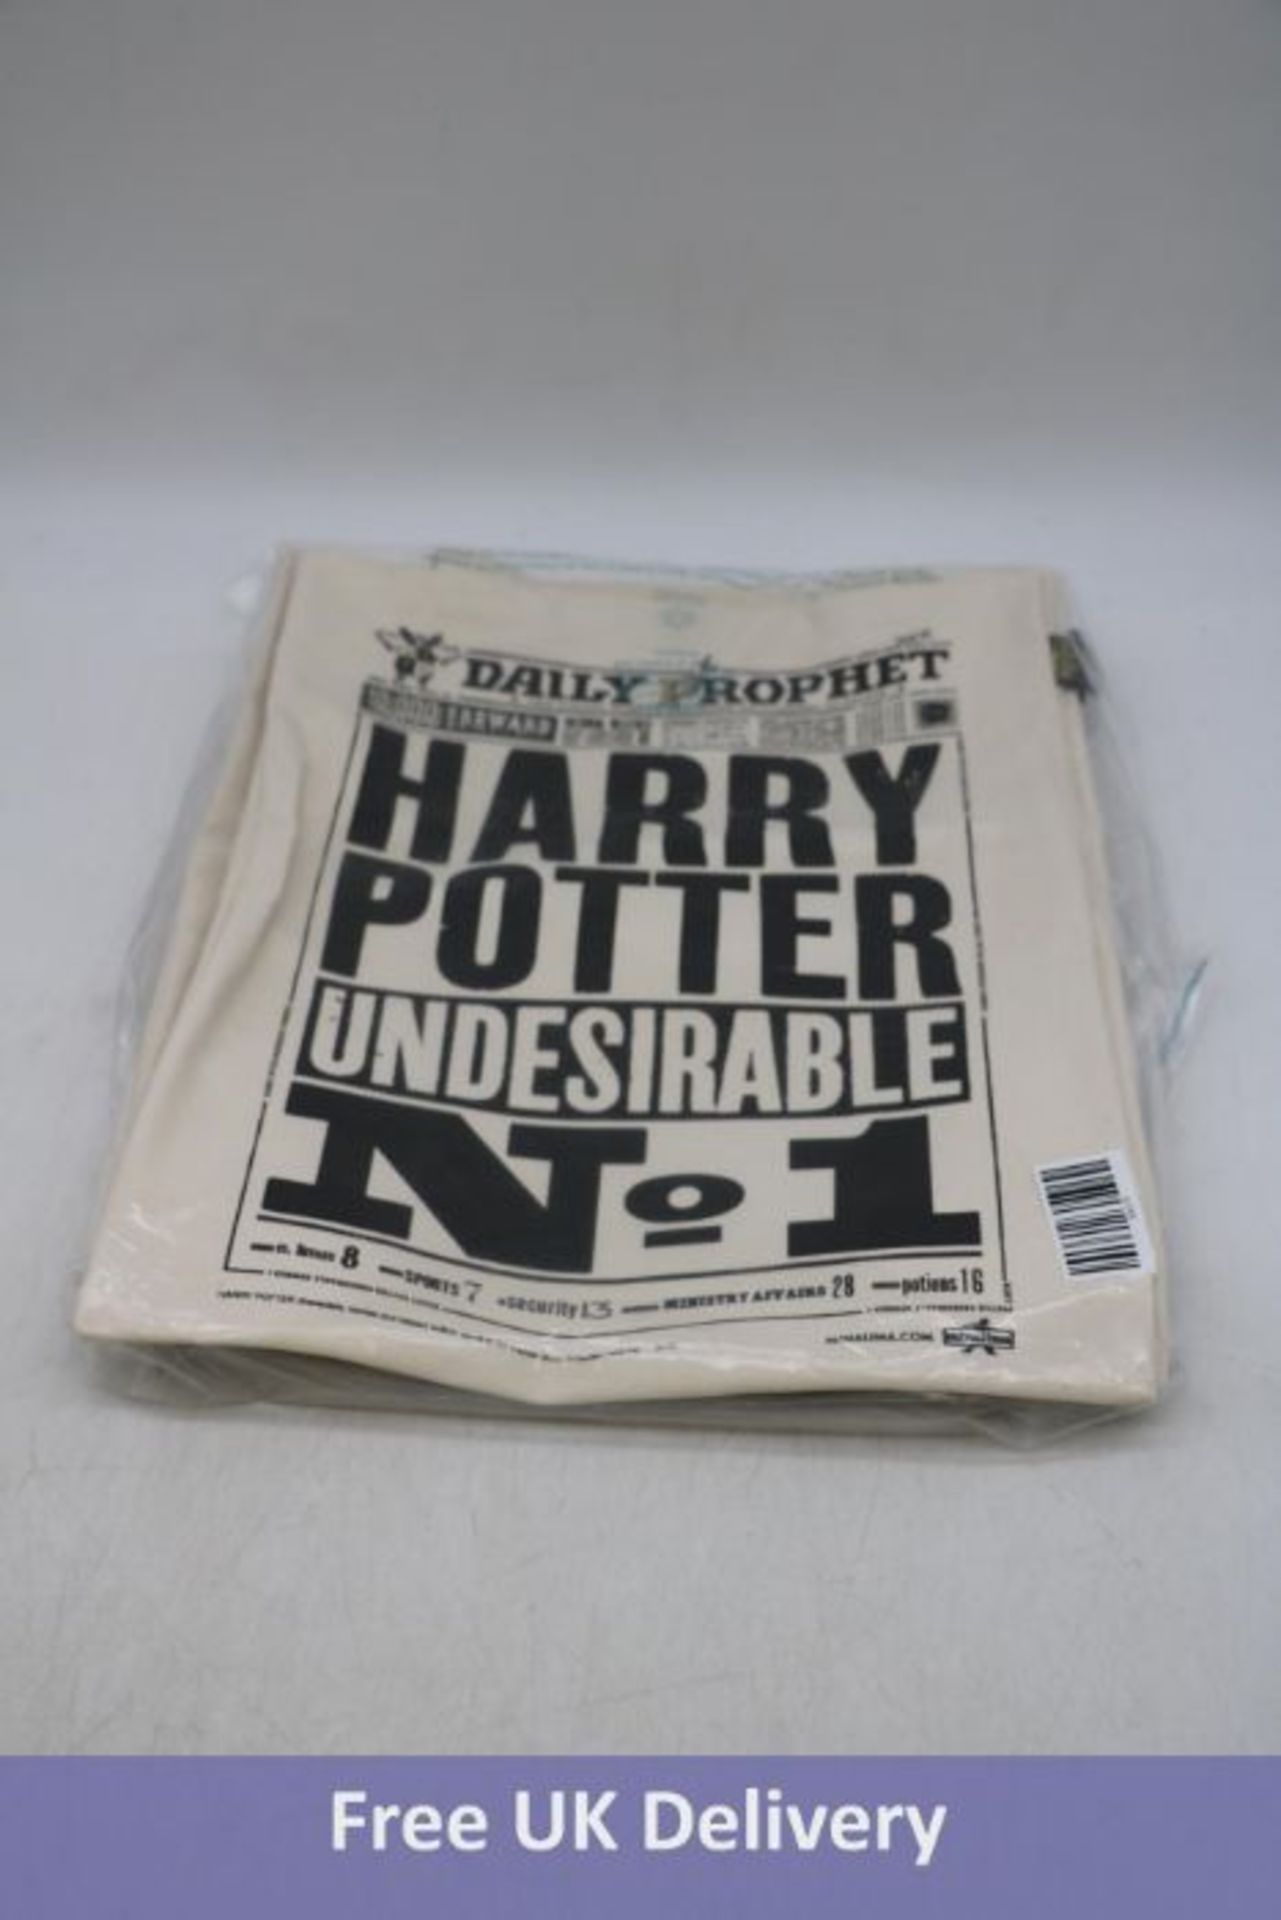 Five Daily Prophet Harry Potter Undesirable No1 Tote Bags, White/Black